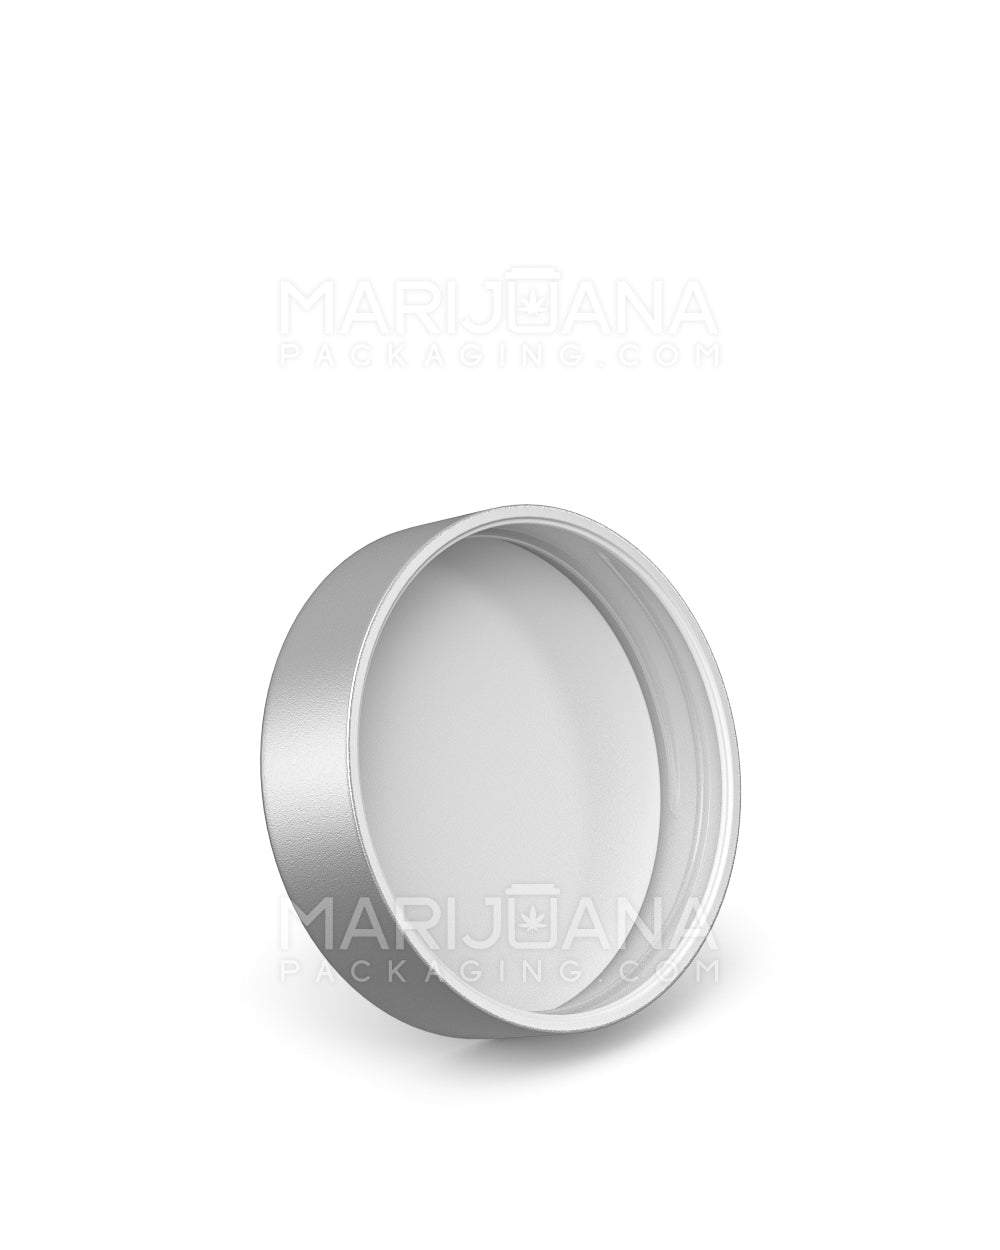 Child Resistant | Smooth Flat Push Down & Turn Plastic Caps w/ Foam Liner | 50mm - Matte Silver - 100 Count - 2